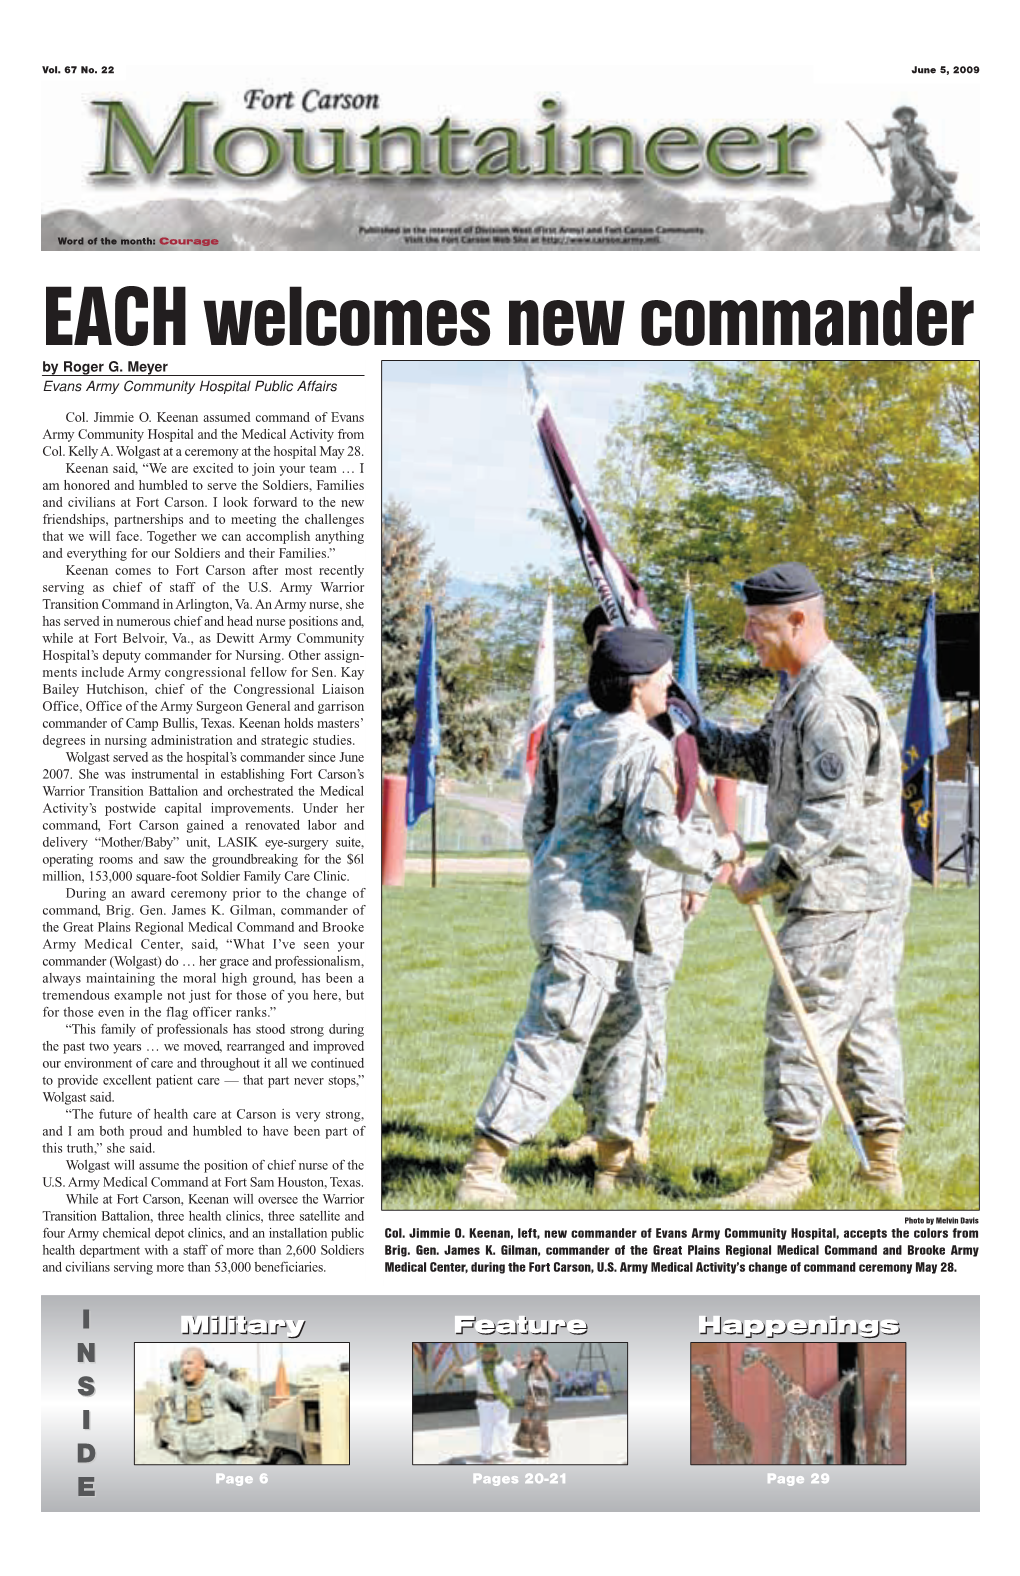 EACH Welcomes New Commander by Roger G